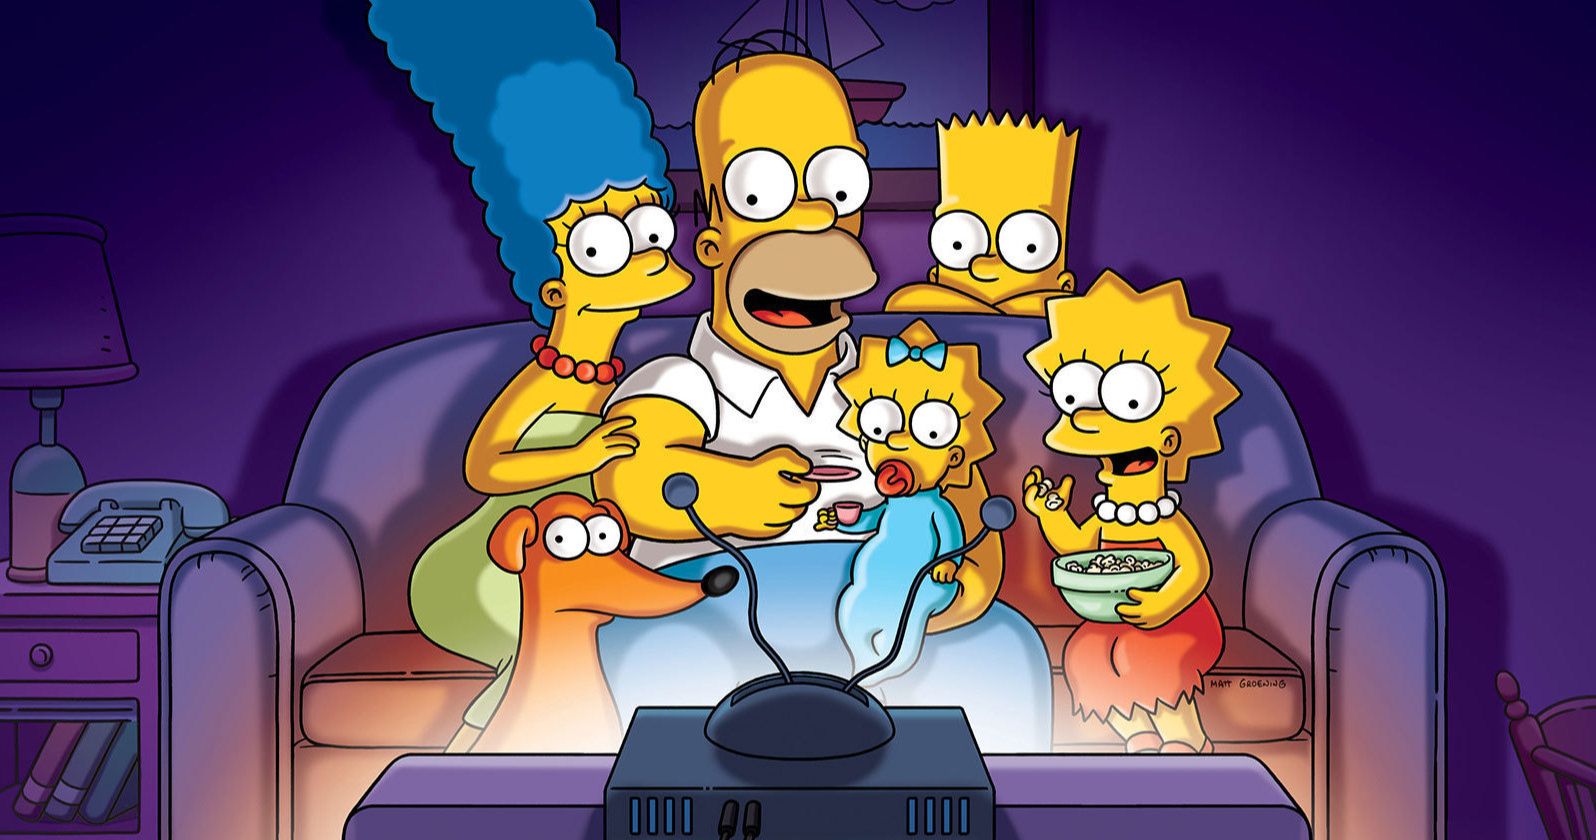 The Simpsons Series Analyst Wanted to Binge Every Episode &amp; Take Notes for $6800